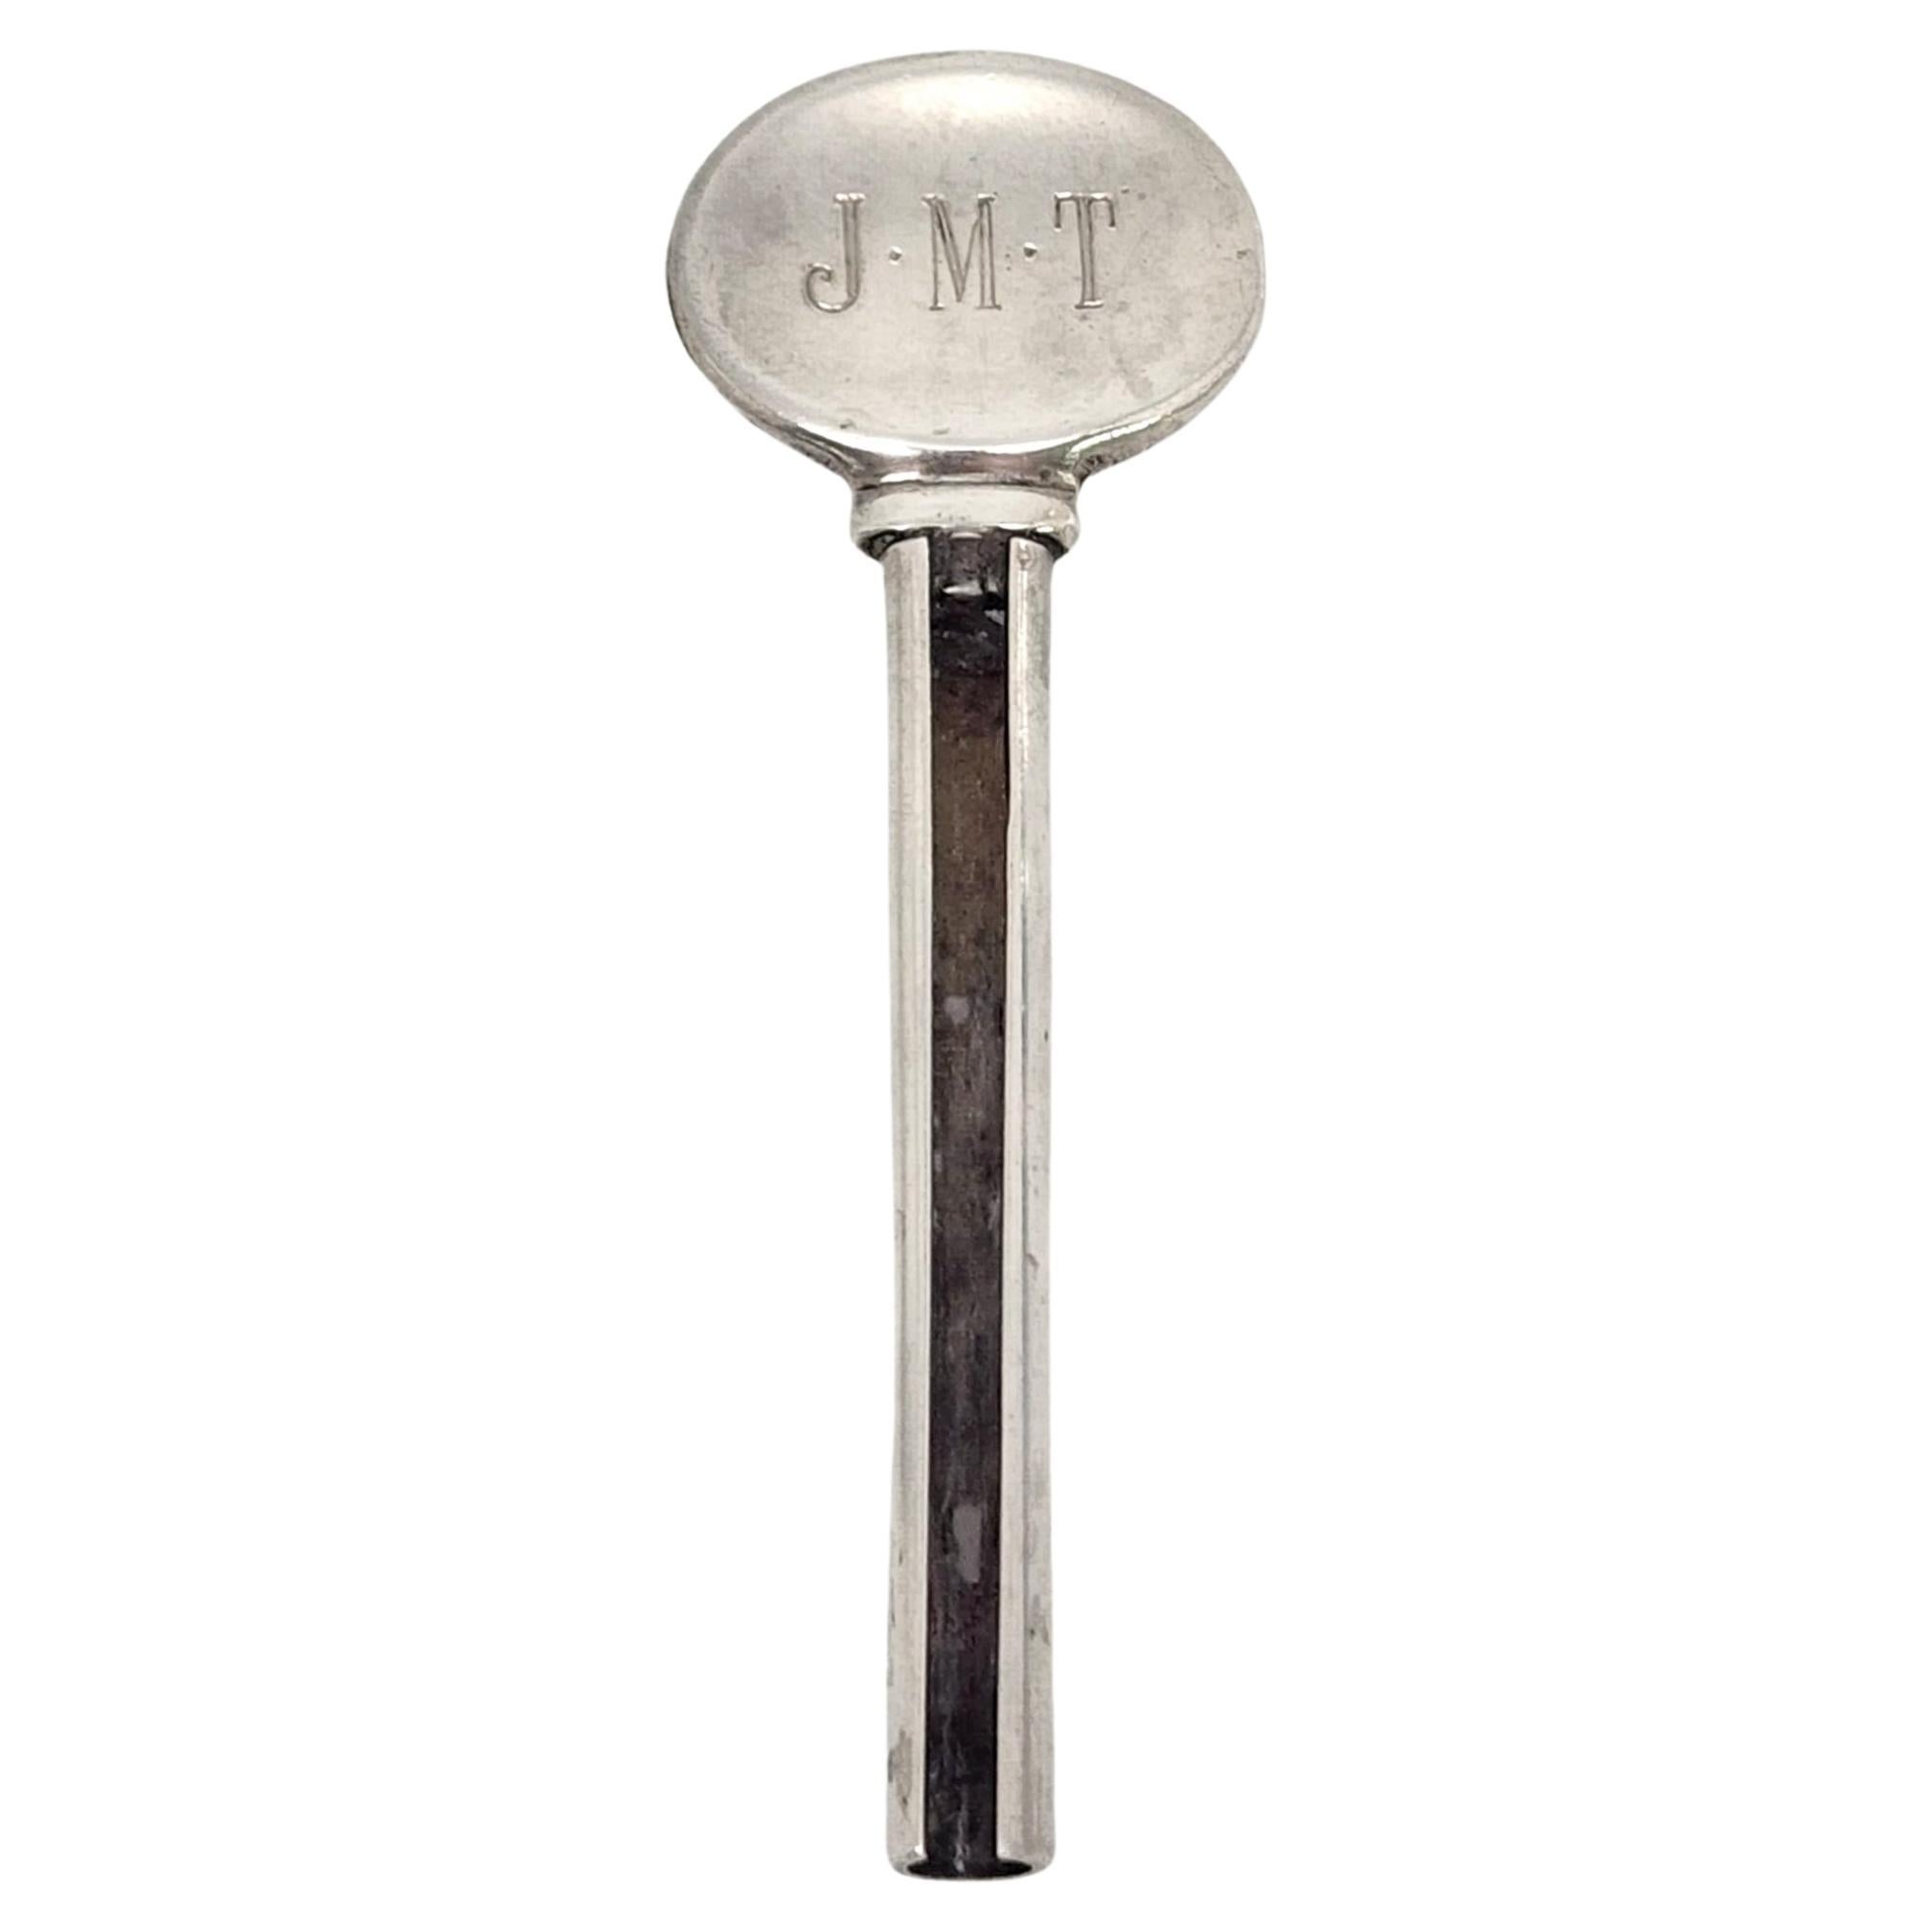  Tiffany & Co. Sterling Silver Toothpaste Tube Squeezer Turn Key with Monogram